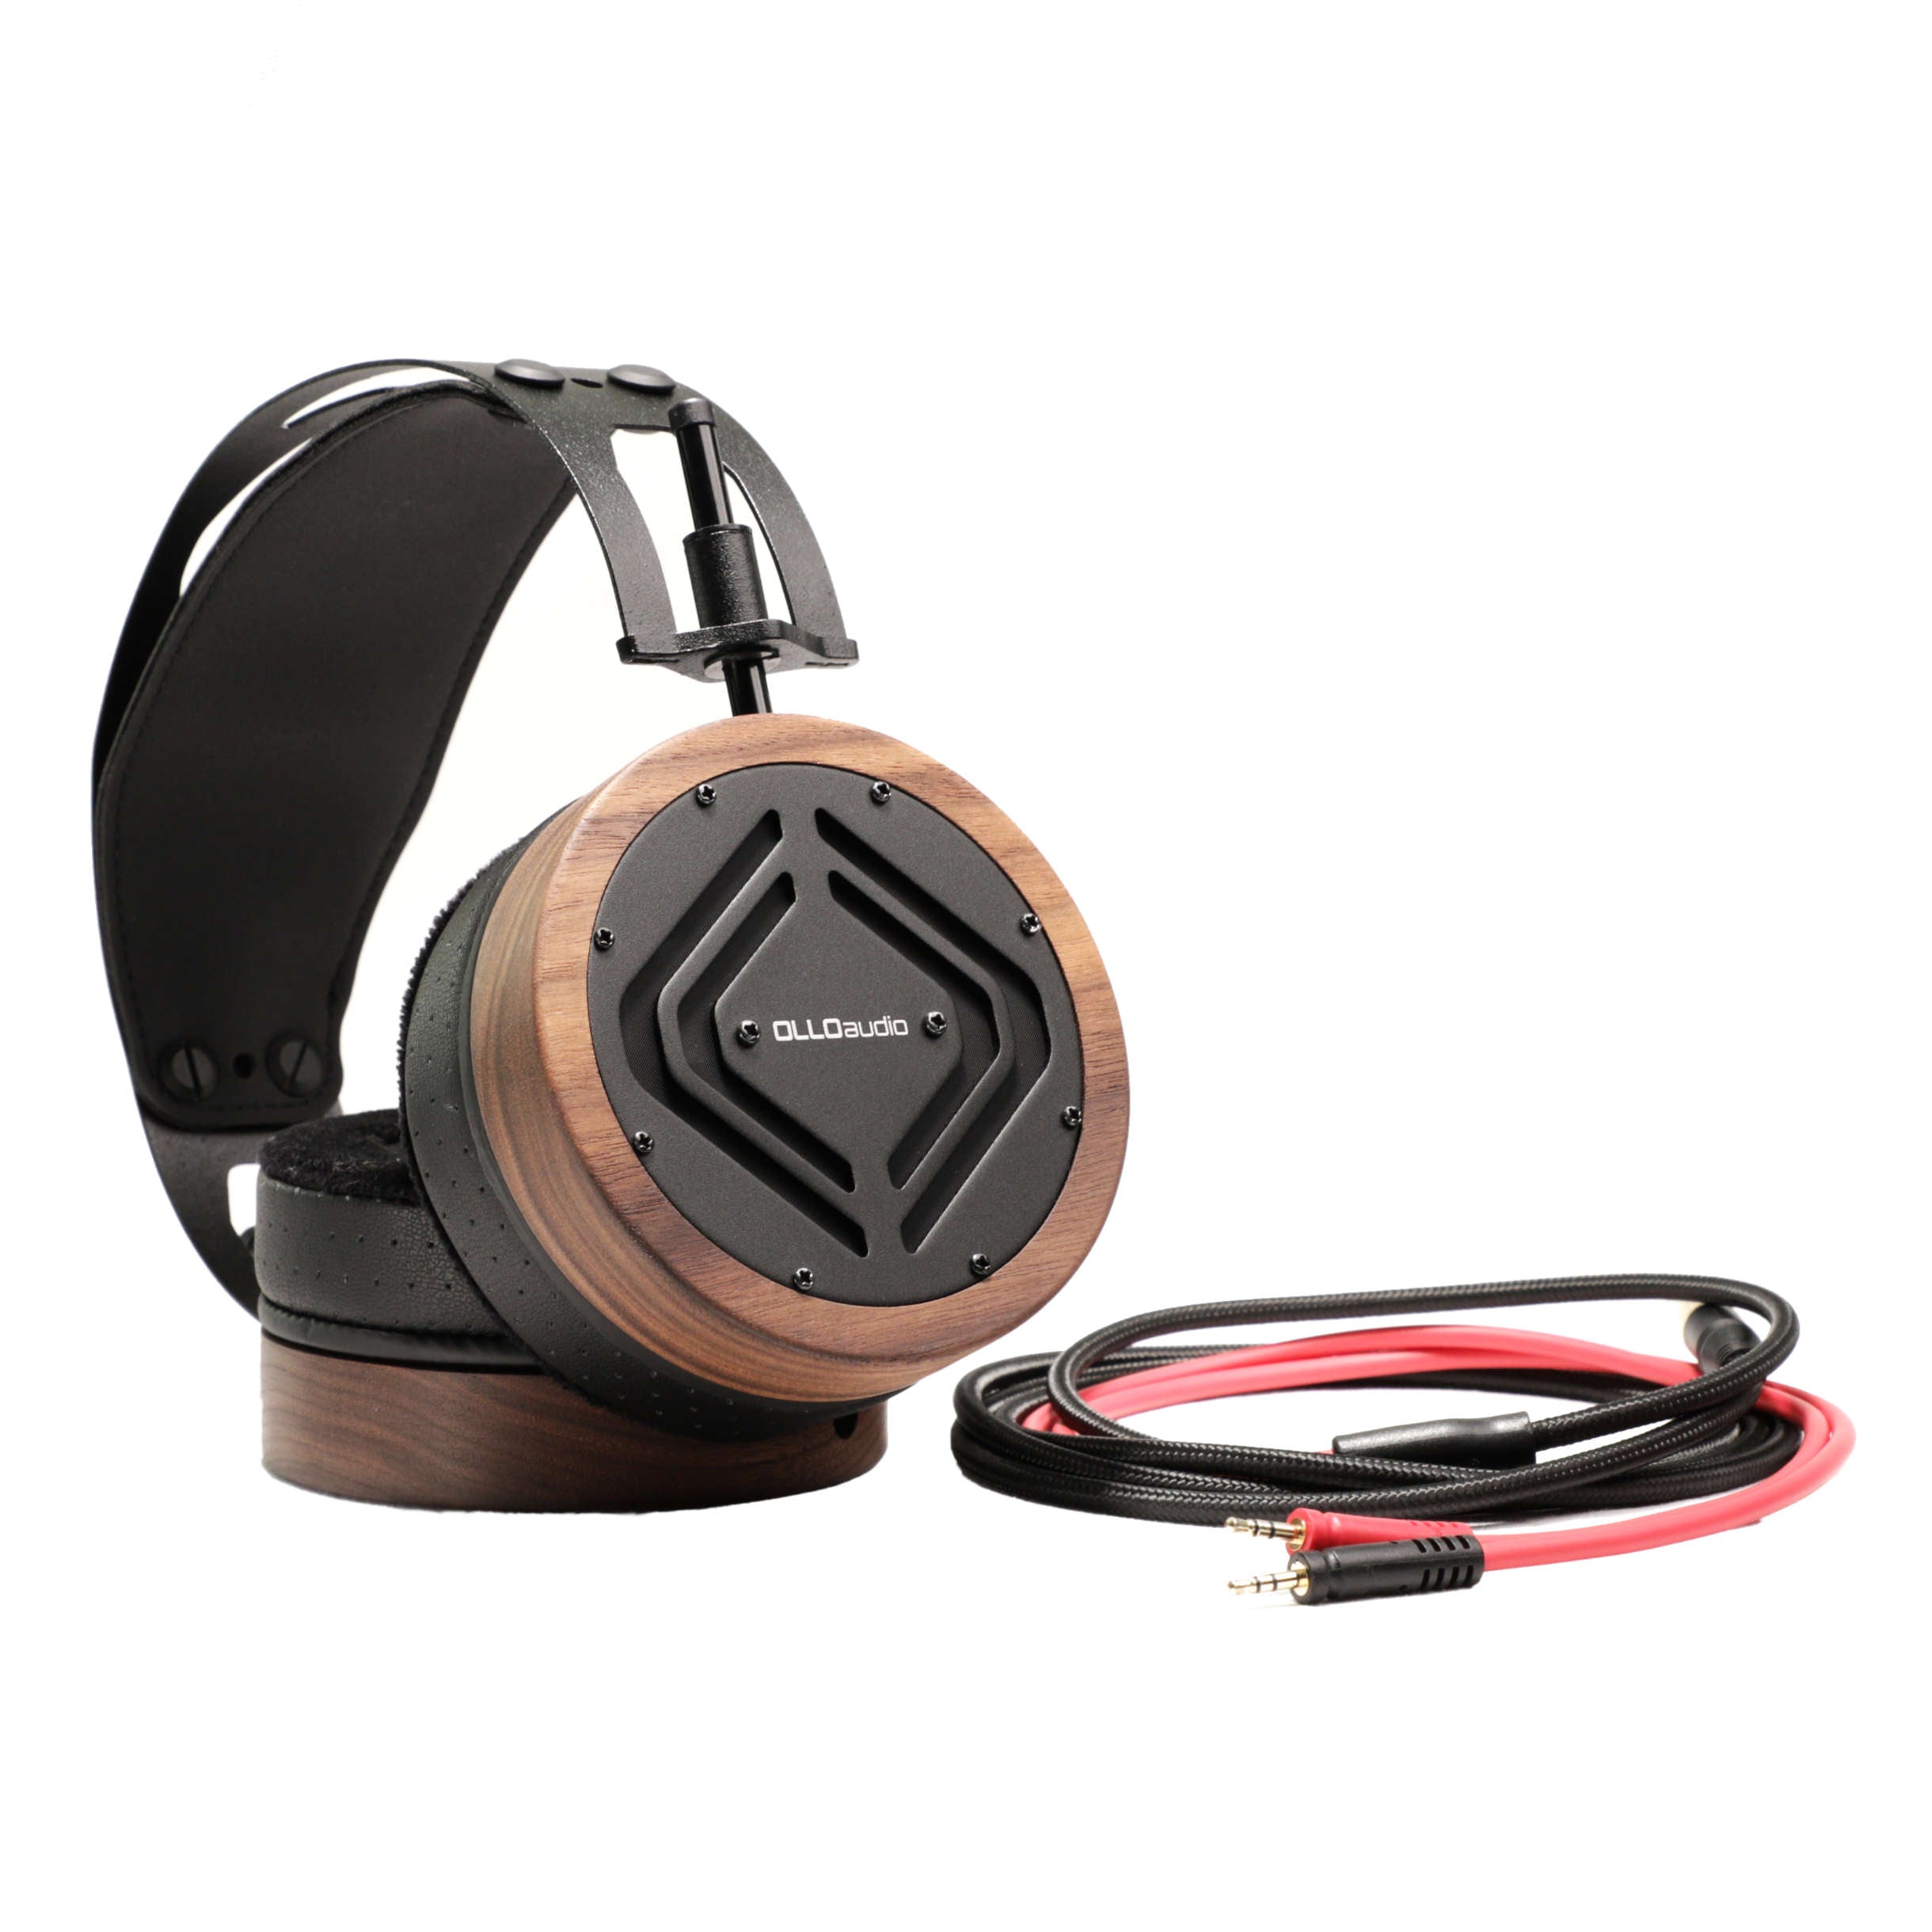 S5X 1.1 headphones for mixing spatial audio e.g. Dolby Atmos or 